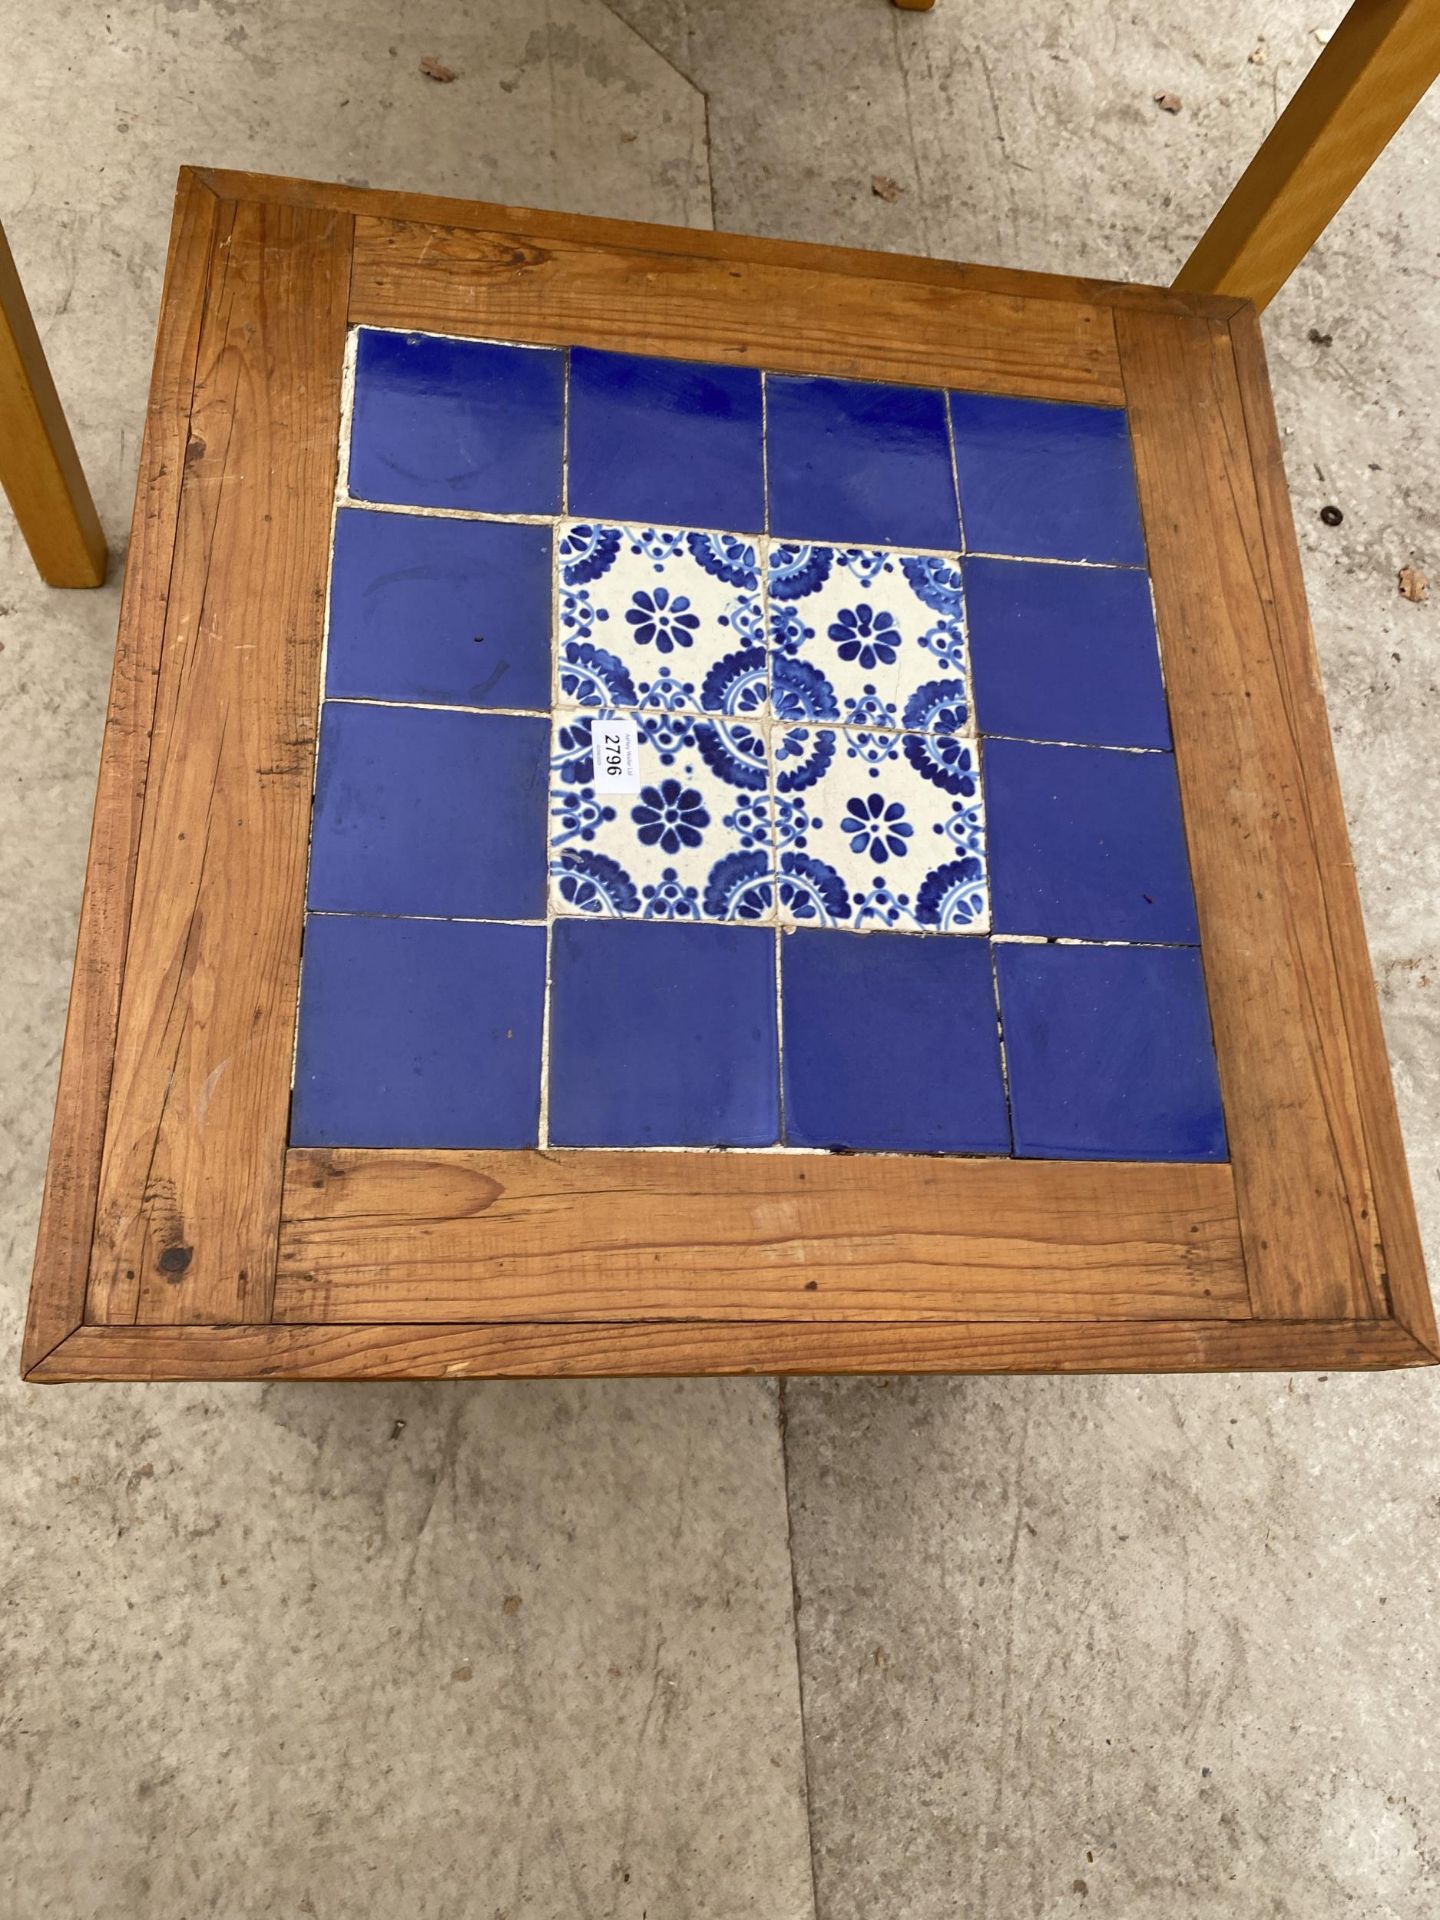 A MODERN PINE LAMP TABLE WITH INSET TILE TOP, 23.5" SQUARE - Image 3 of 3